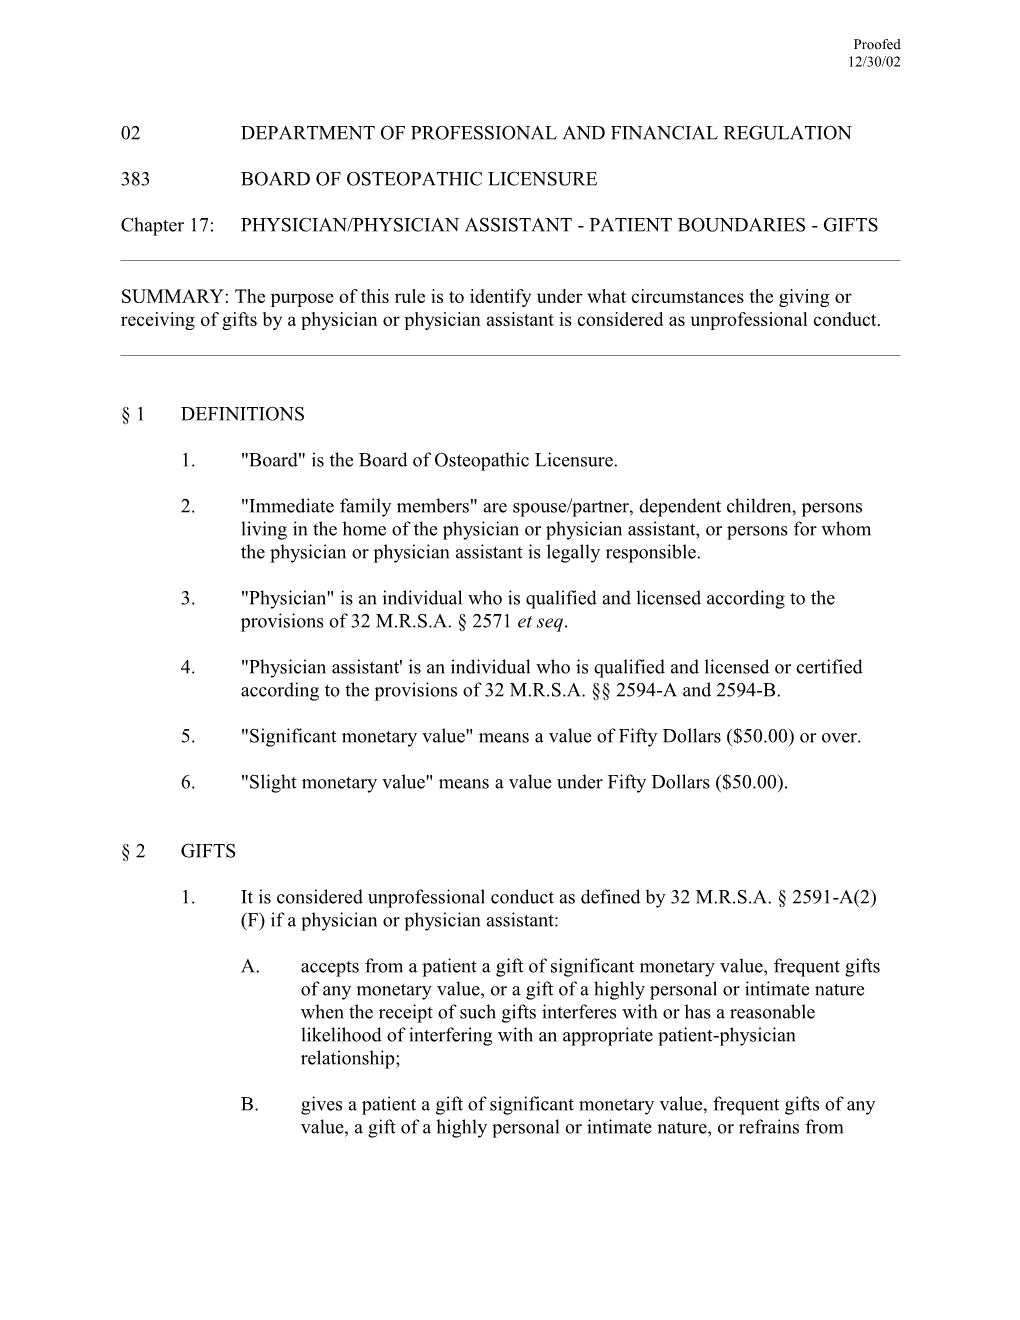 02 Department of Professional and Financial Regulation 383 Board of Osteopathic Licensure